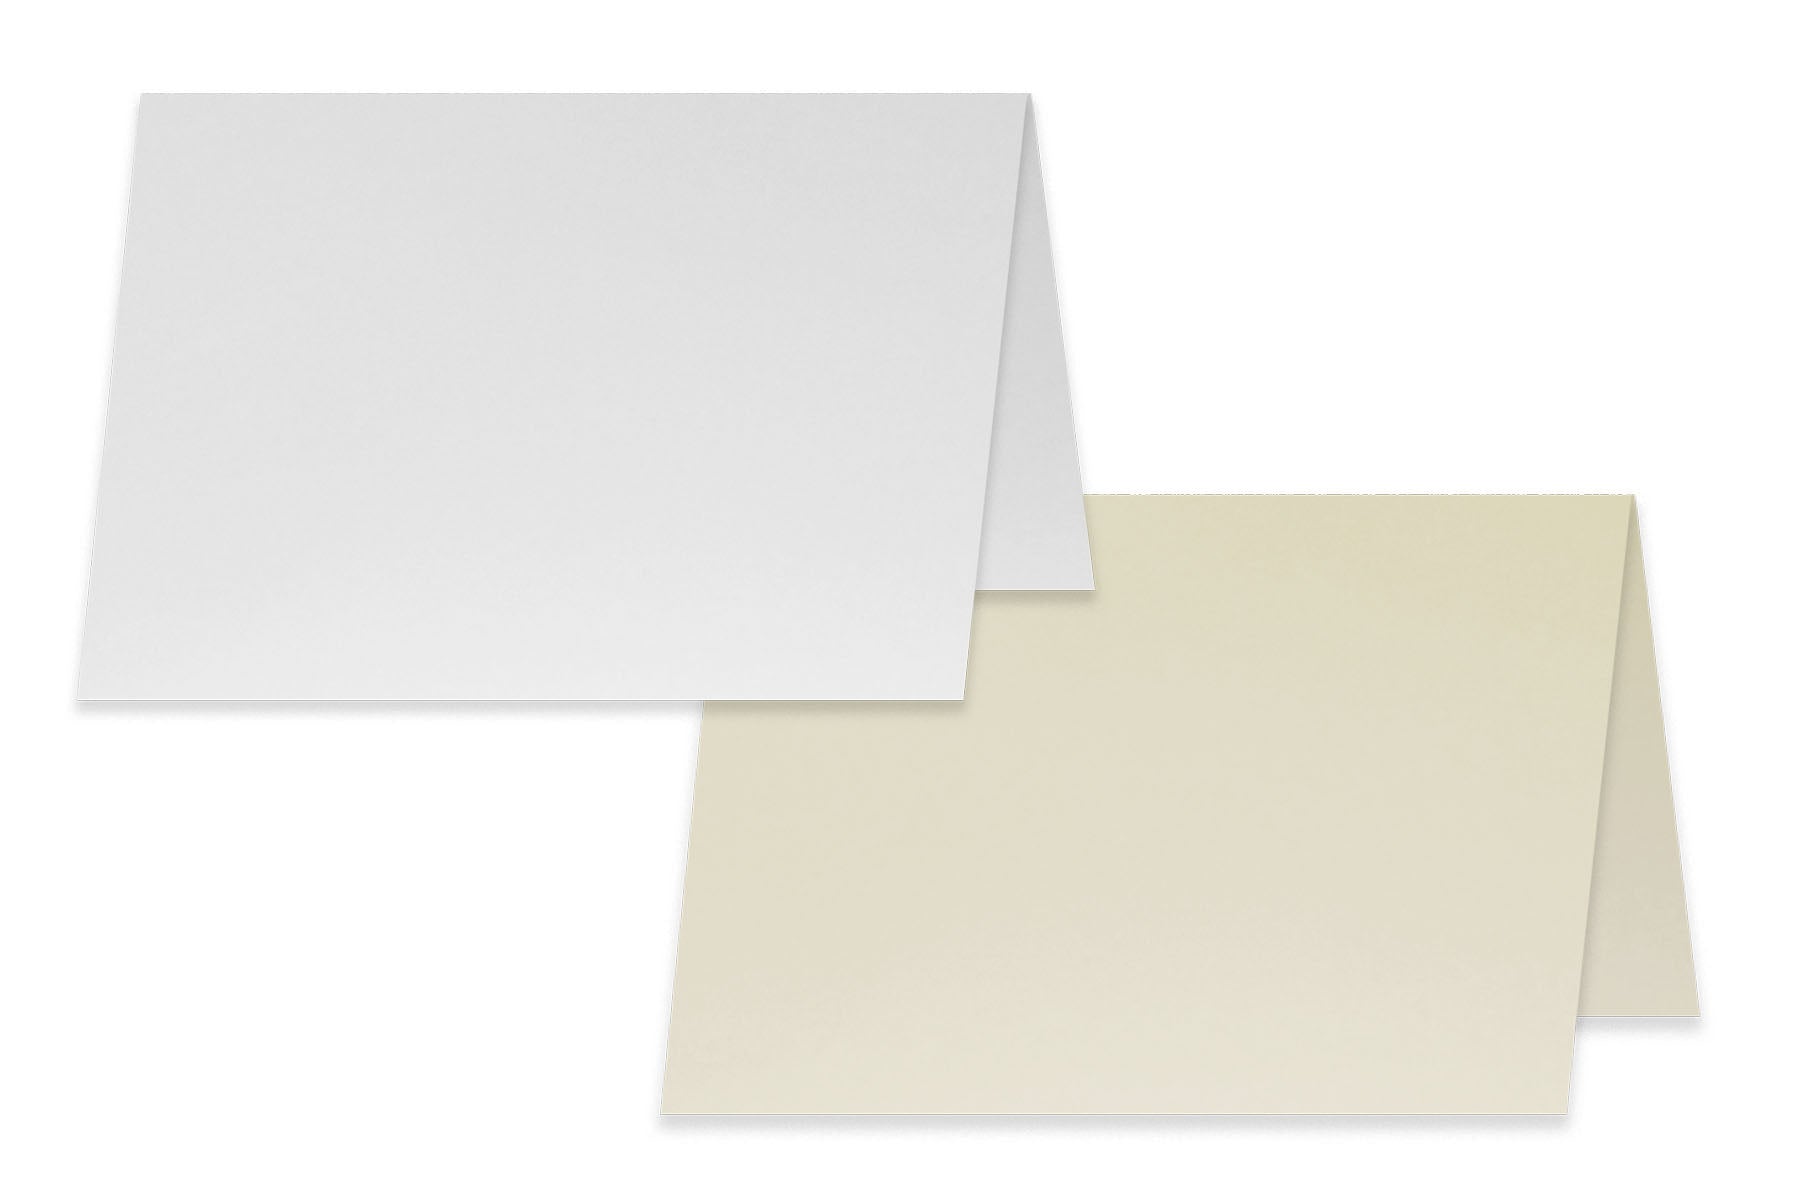 White Blank Cards and Envelopes, Card Blanks, Note Cards With Envelopes,  White A2 Cards, Card Making Supplies, Cards for Stamping, Set of 12 